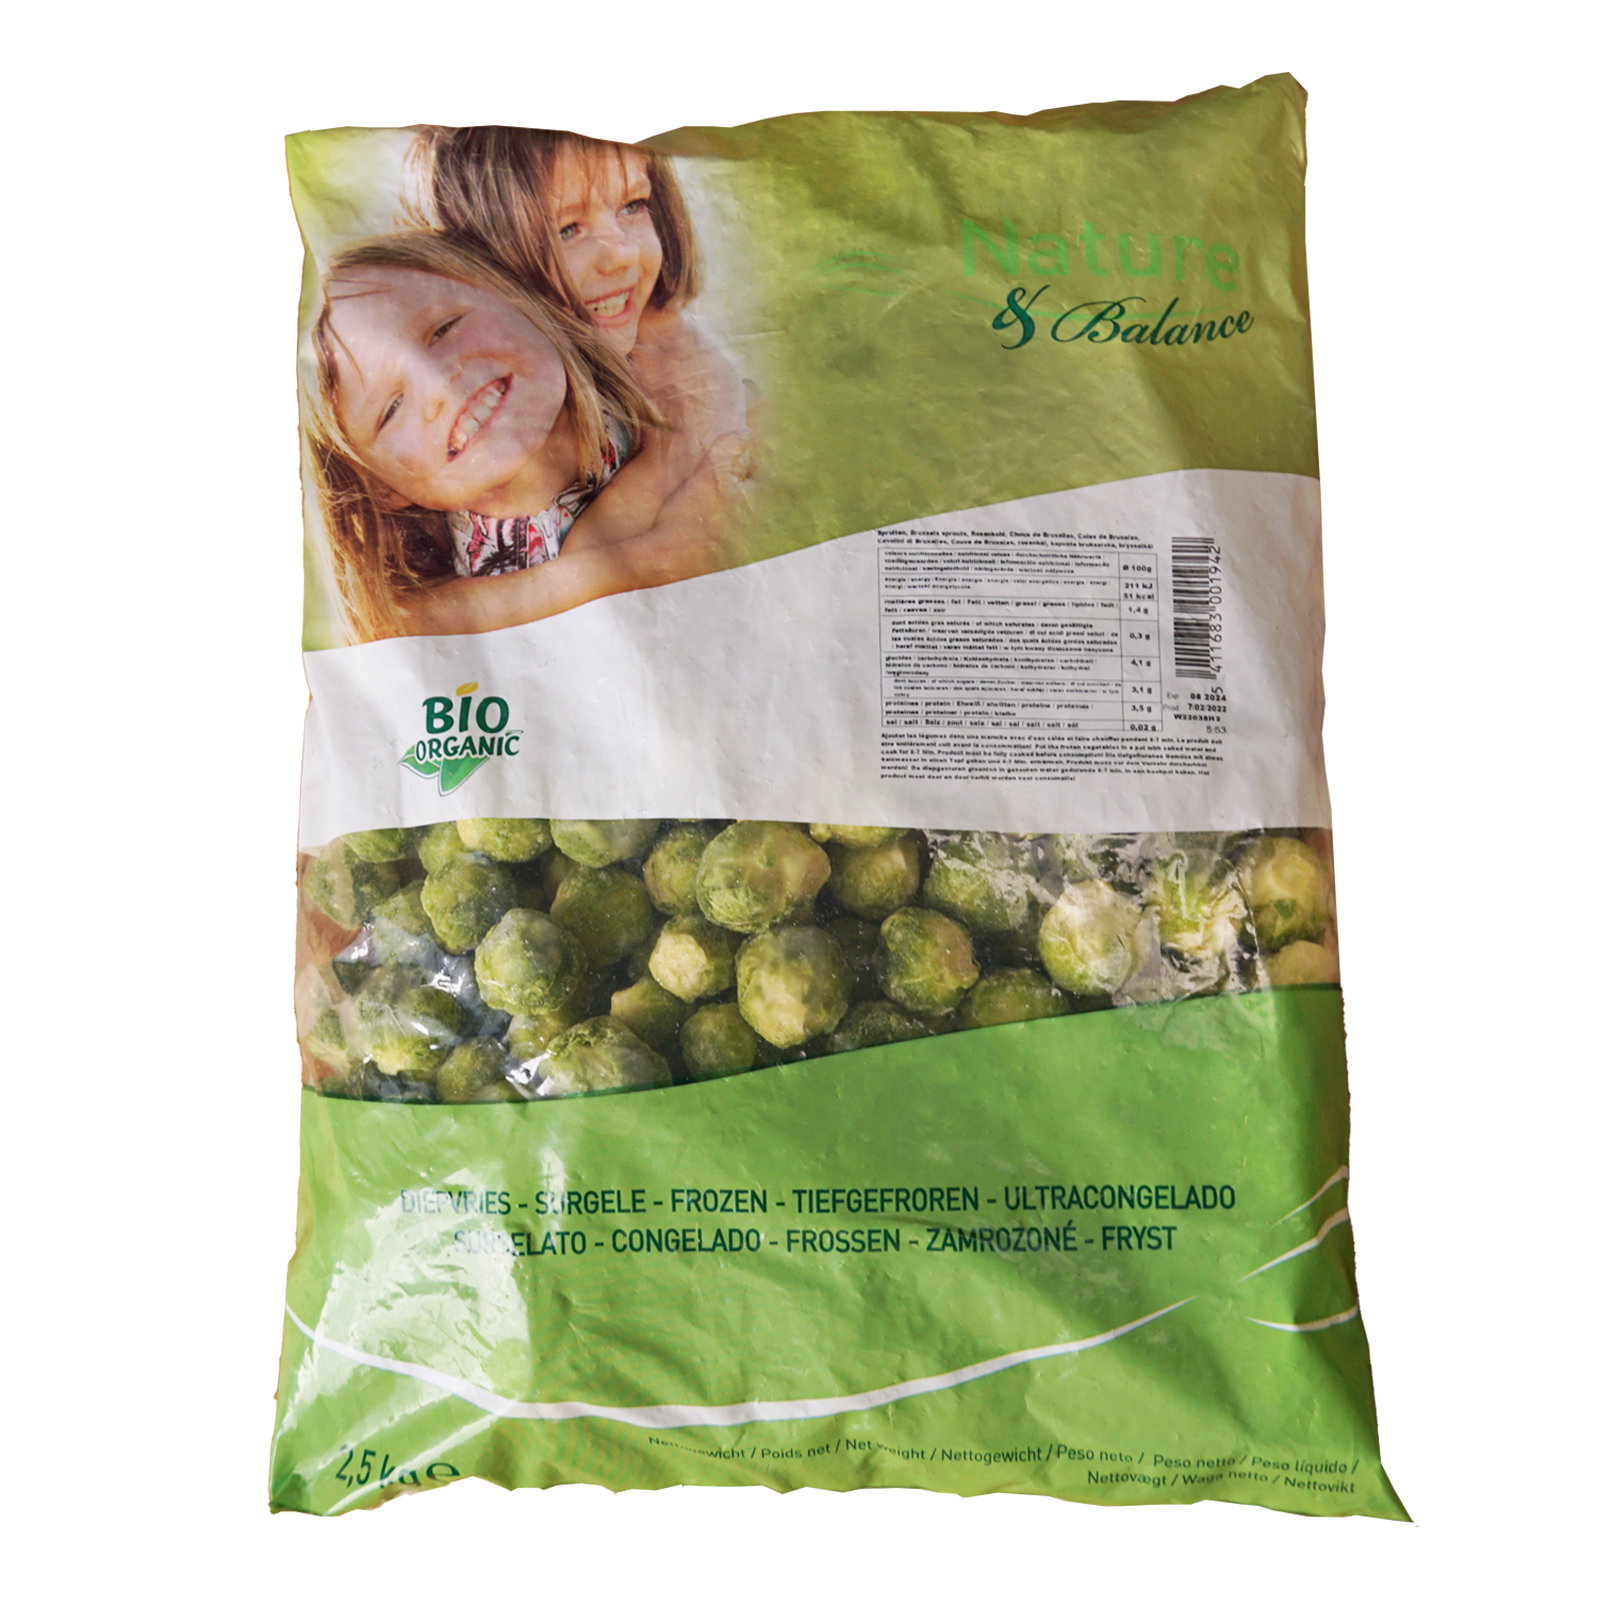 Certified Organic Frozen Brussels Sprouts from Belgium (2.5kg) - Horizon Farms